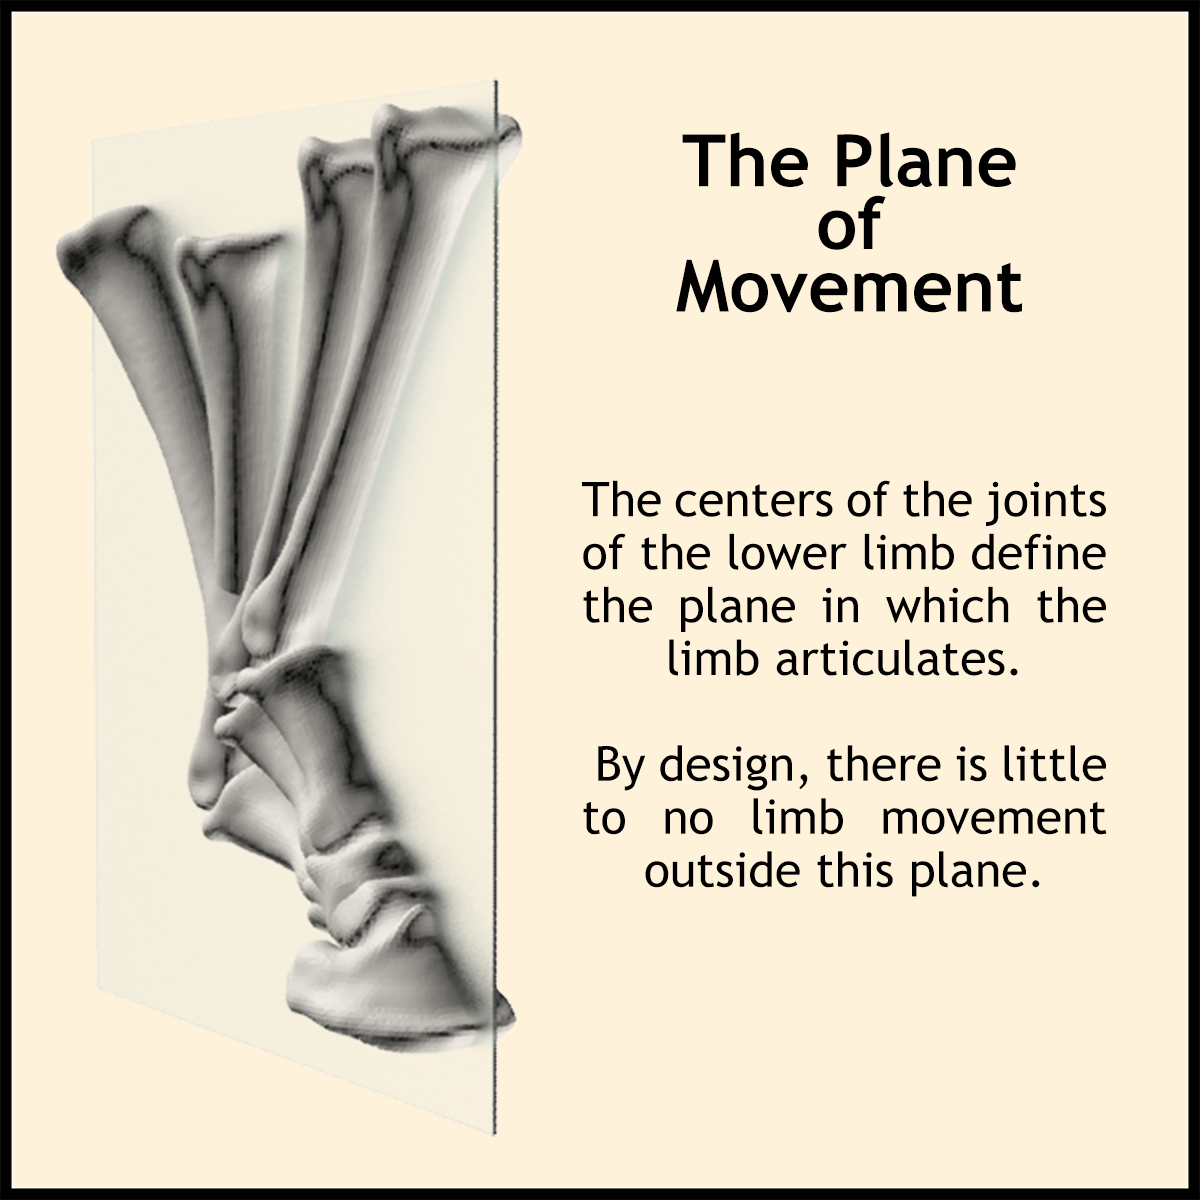 The Plane of Movement